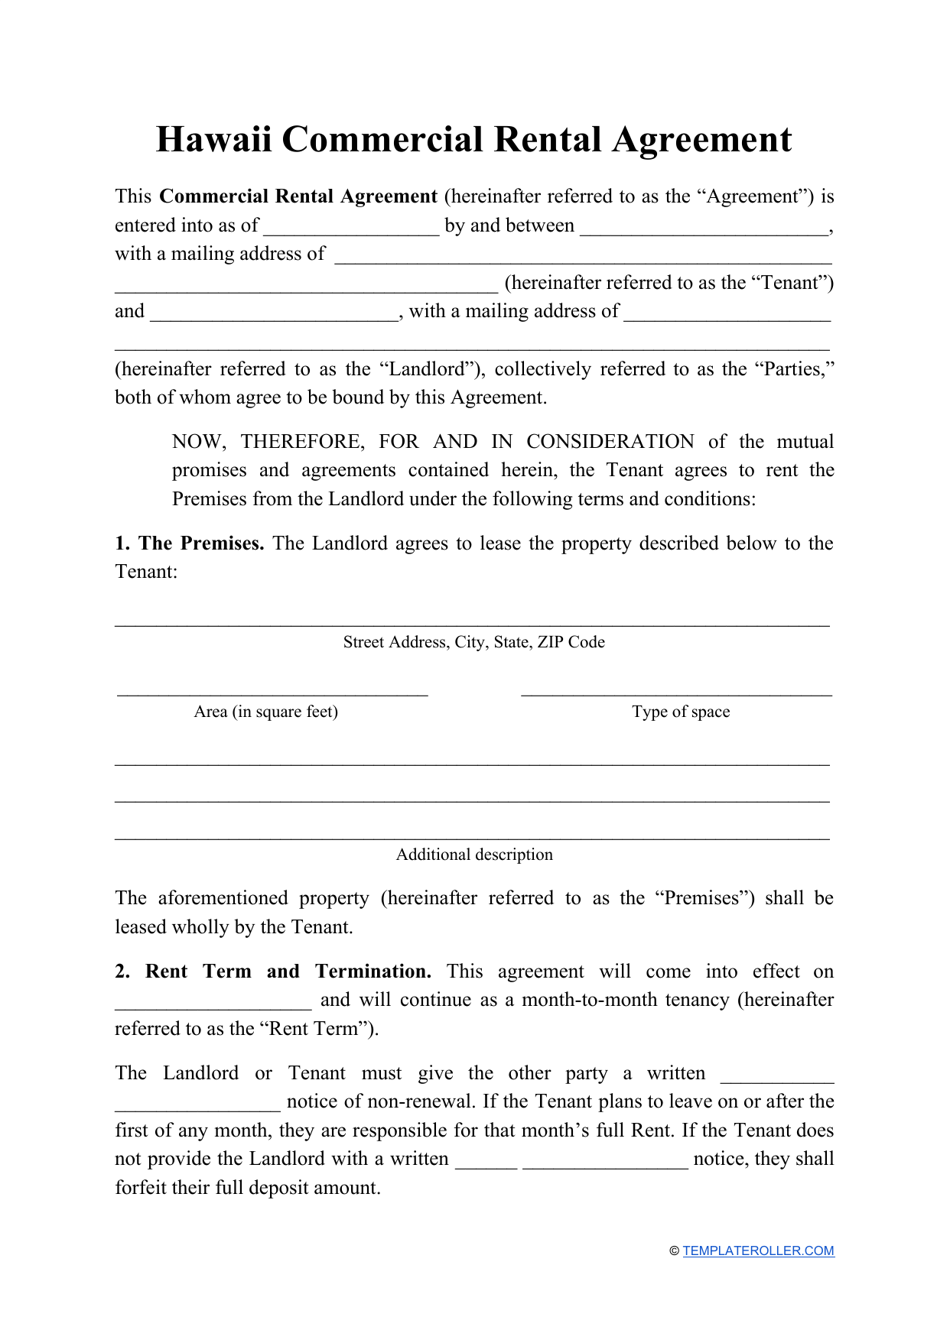 Commercial Rental Agreement Template - Hawaii, Page 1